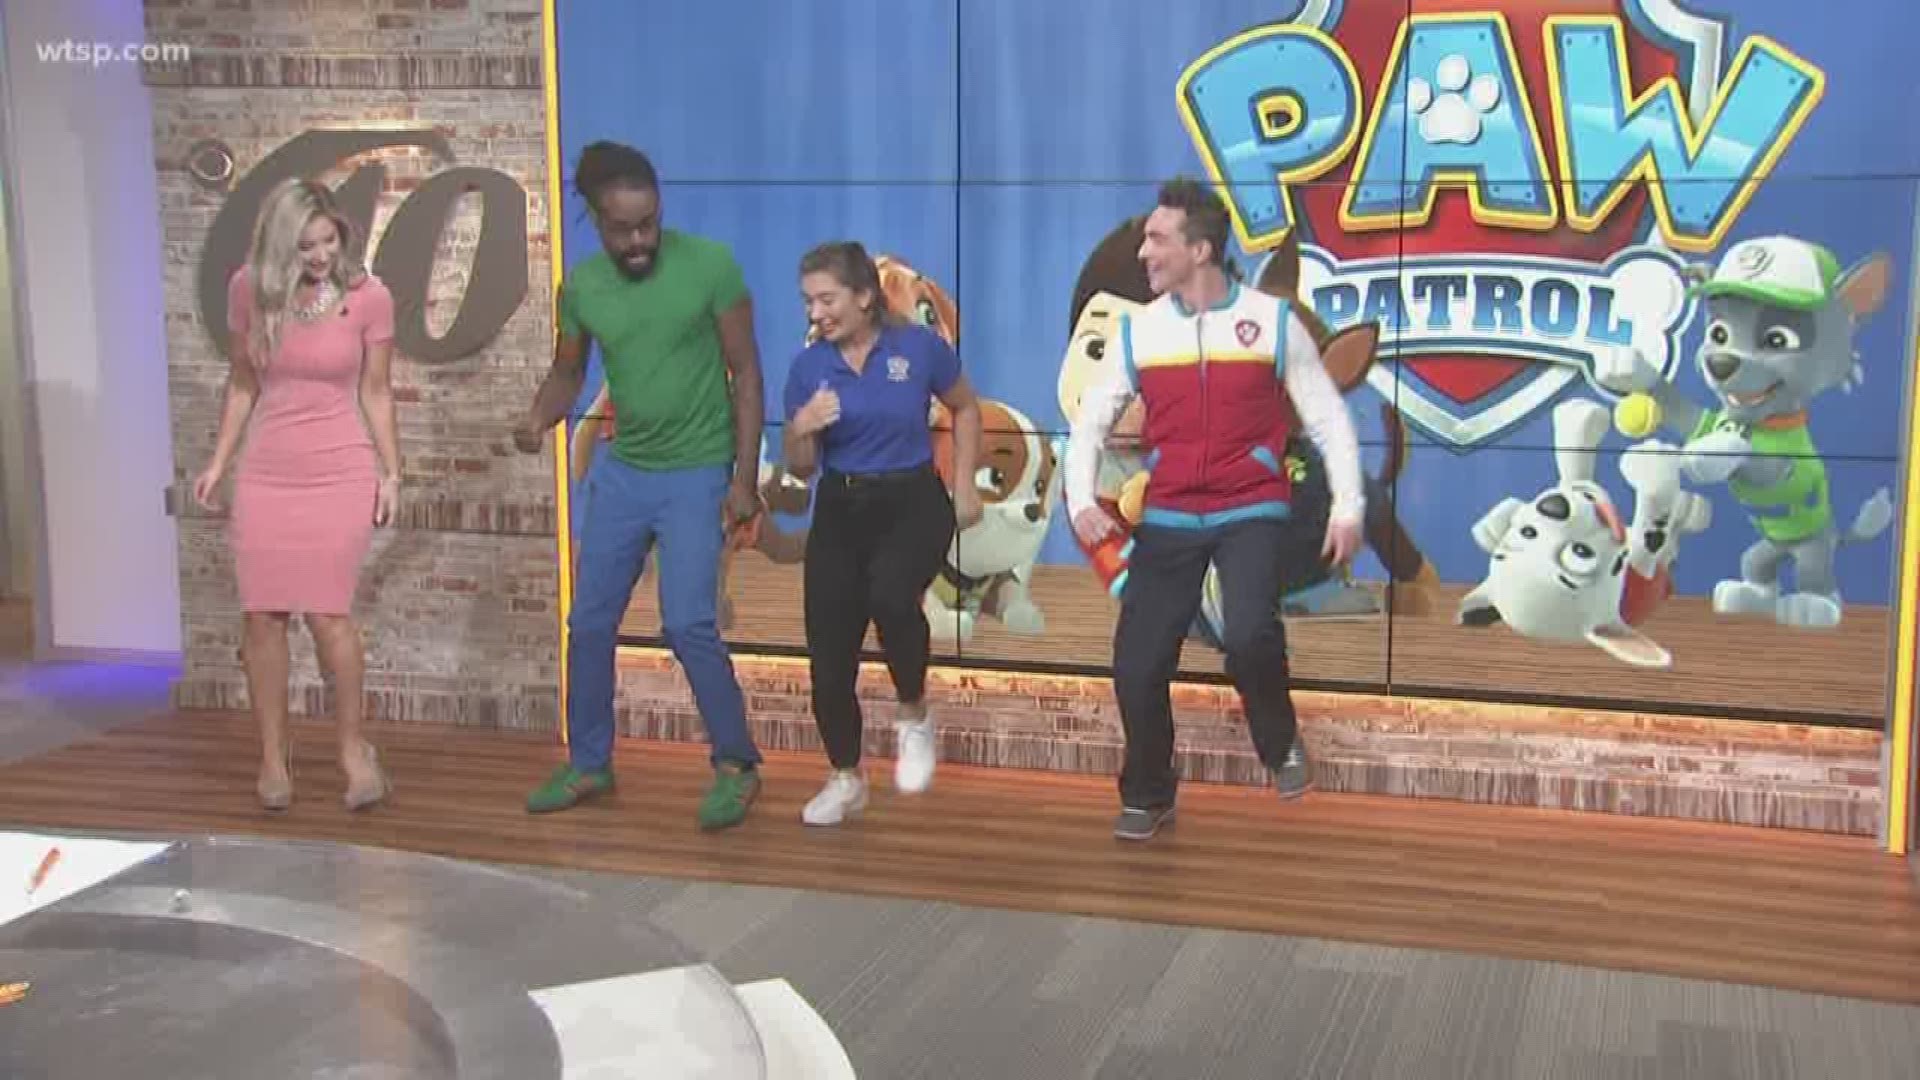 Look who stopped by during 10News Brightside!

PAW Patrol Live! Race to the Rescue is set to perform Saturday at 10 a.m. and 2 p.m at the Straz Center. The group will also perform Sunday at noon and 4 p.m.